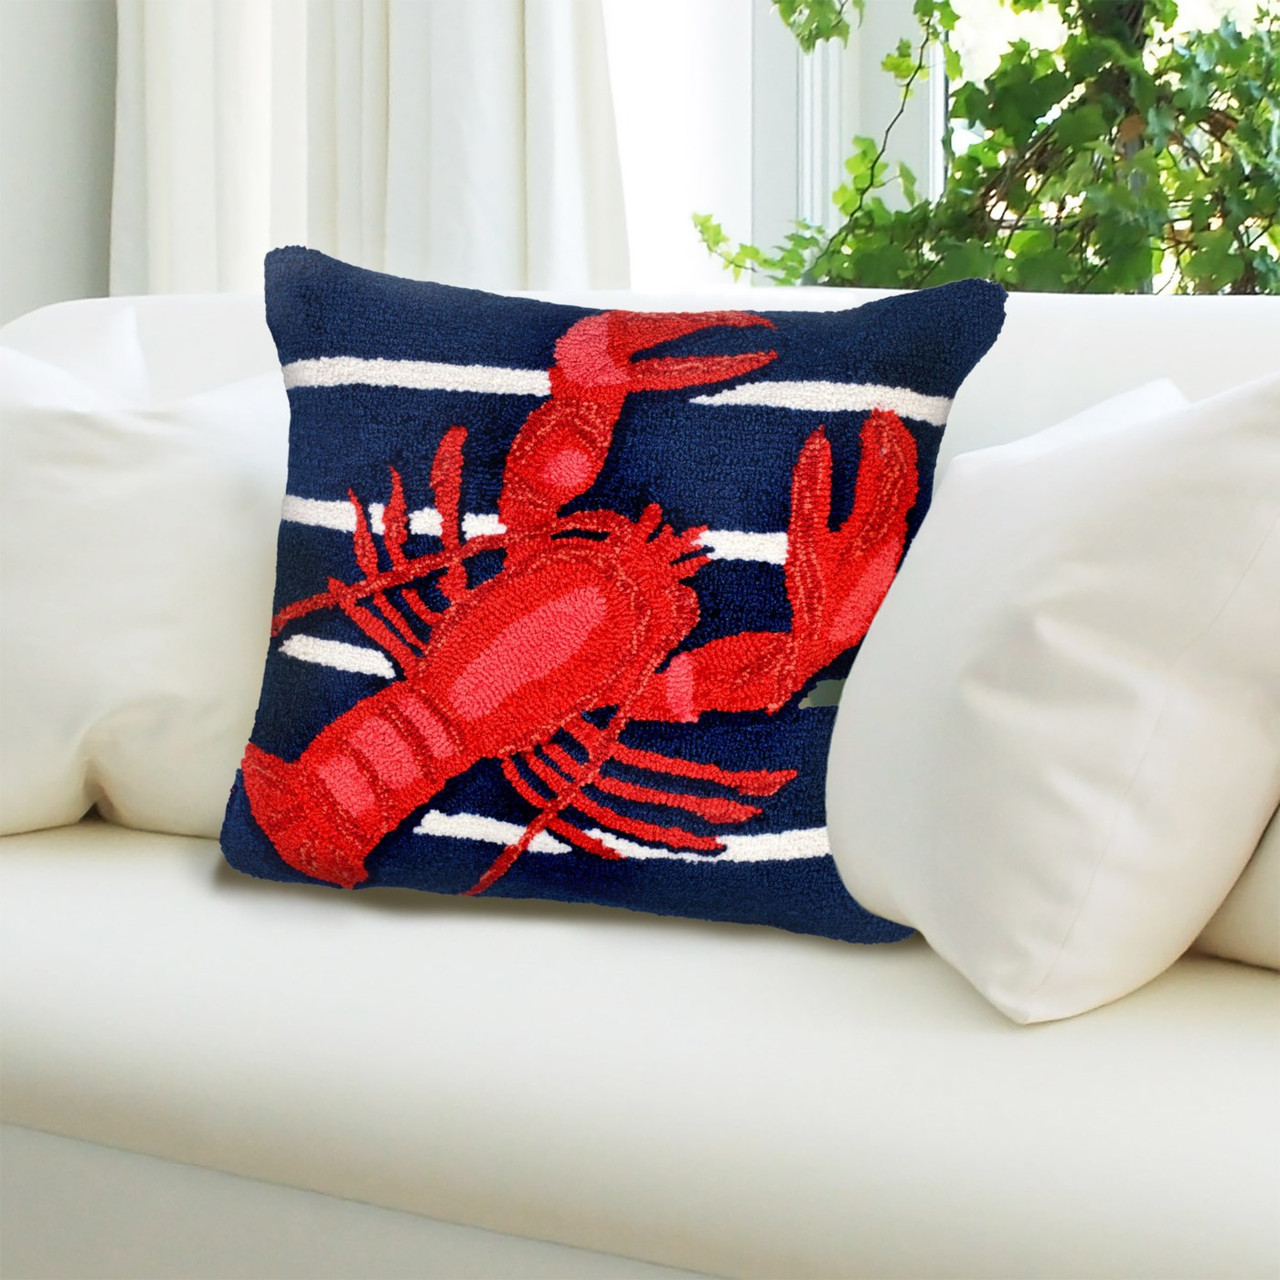 Frontporch Lobster on Stripes Indoor/Outdoor Throw Pillow - 18" Square